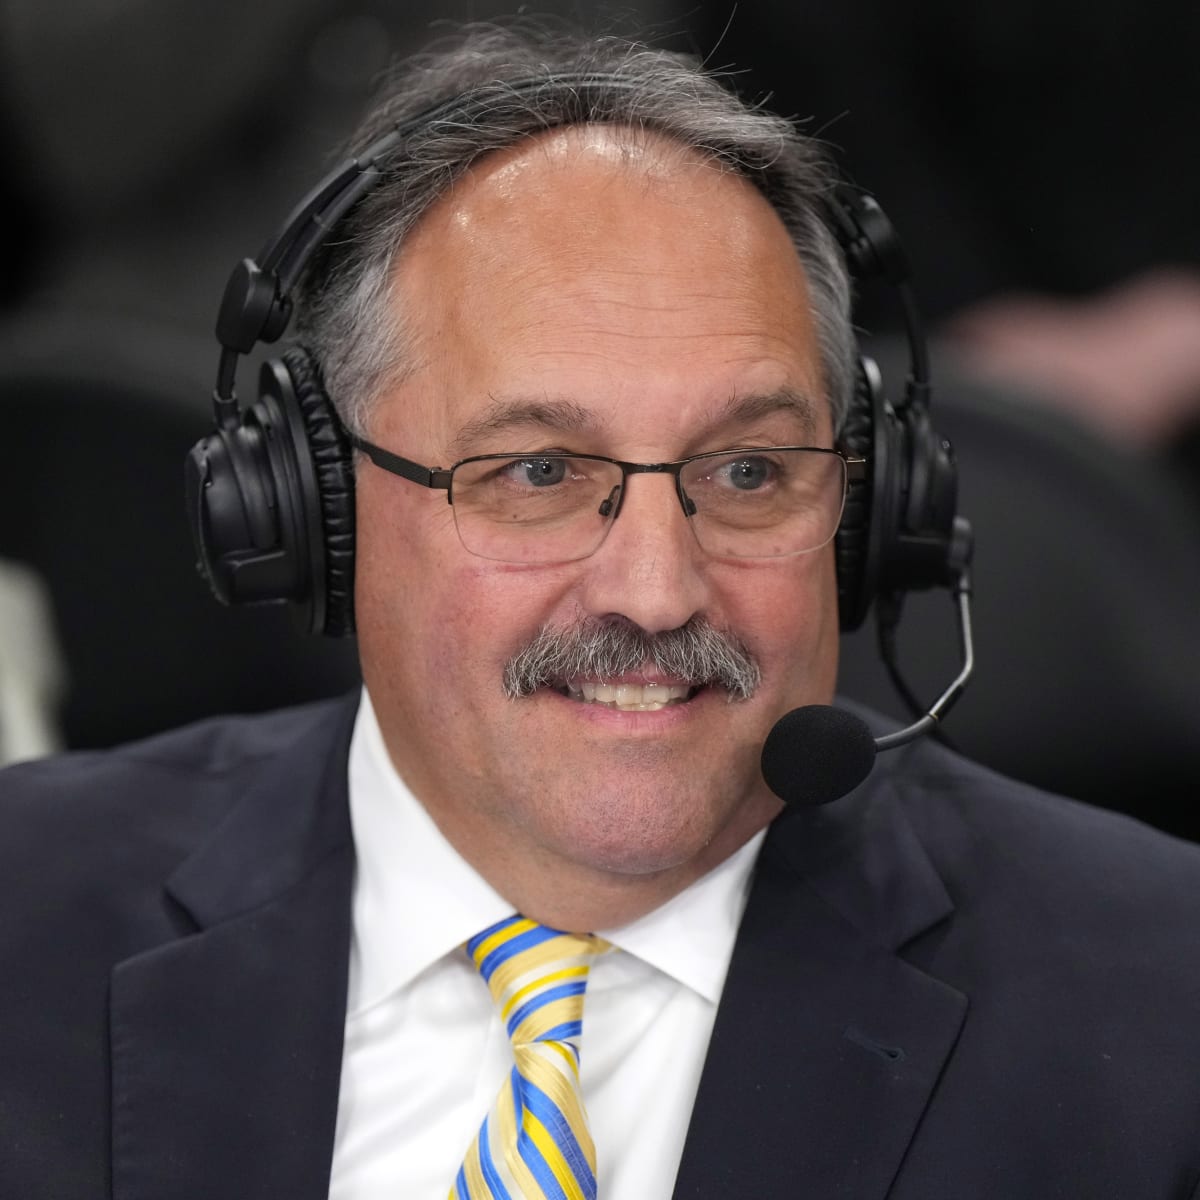 Stan Van Gundy includes Tyler Herro in 'soft' generation chatter continues